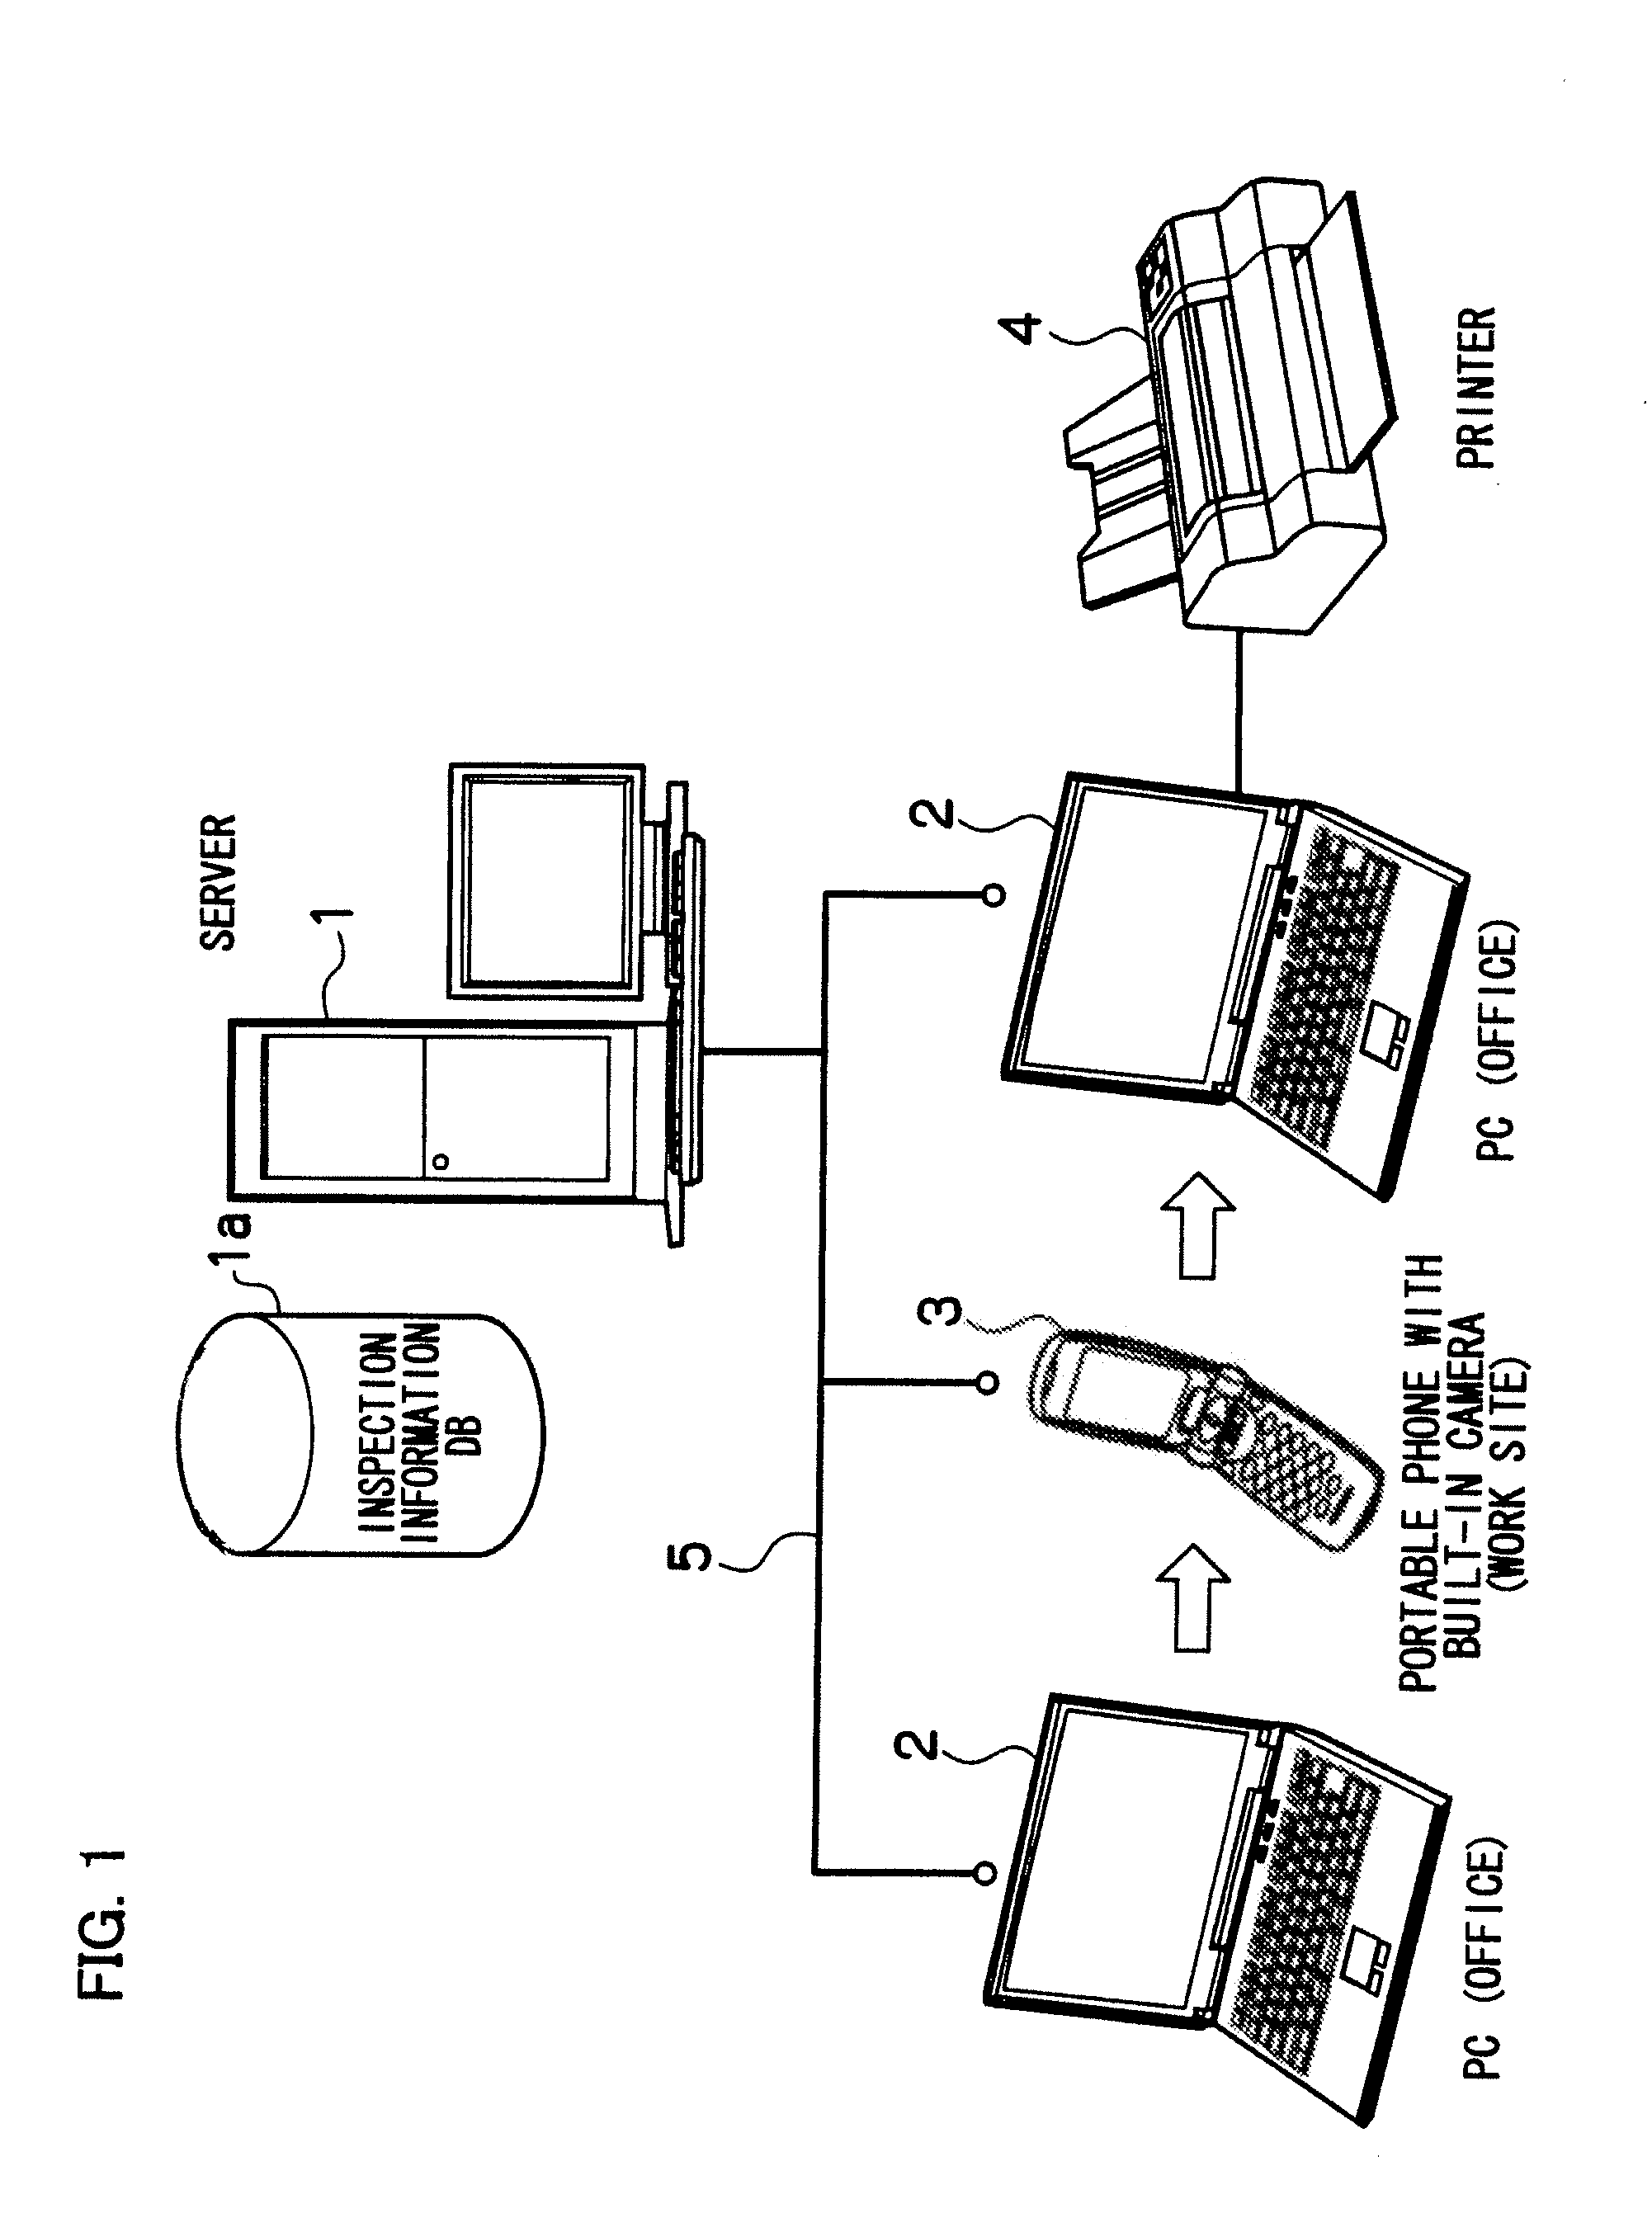 Inspection information processing apparatus and method